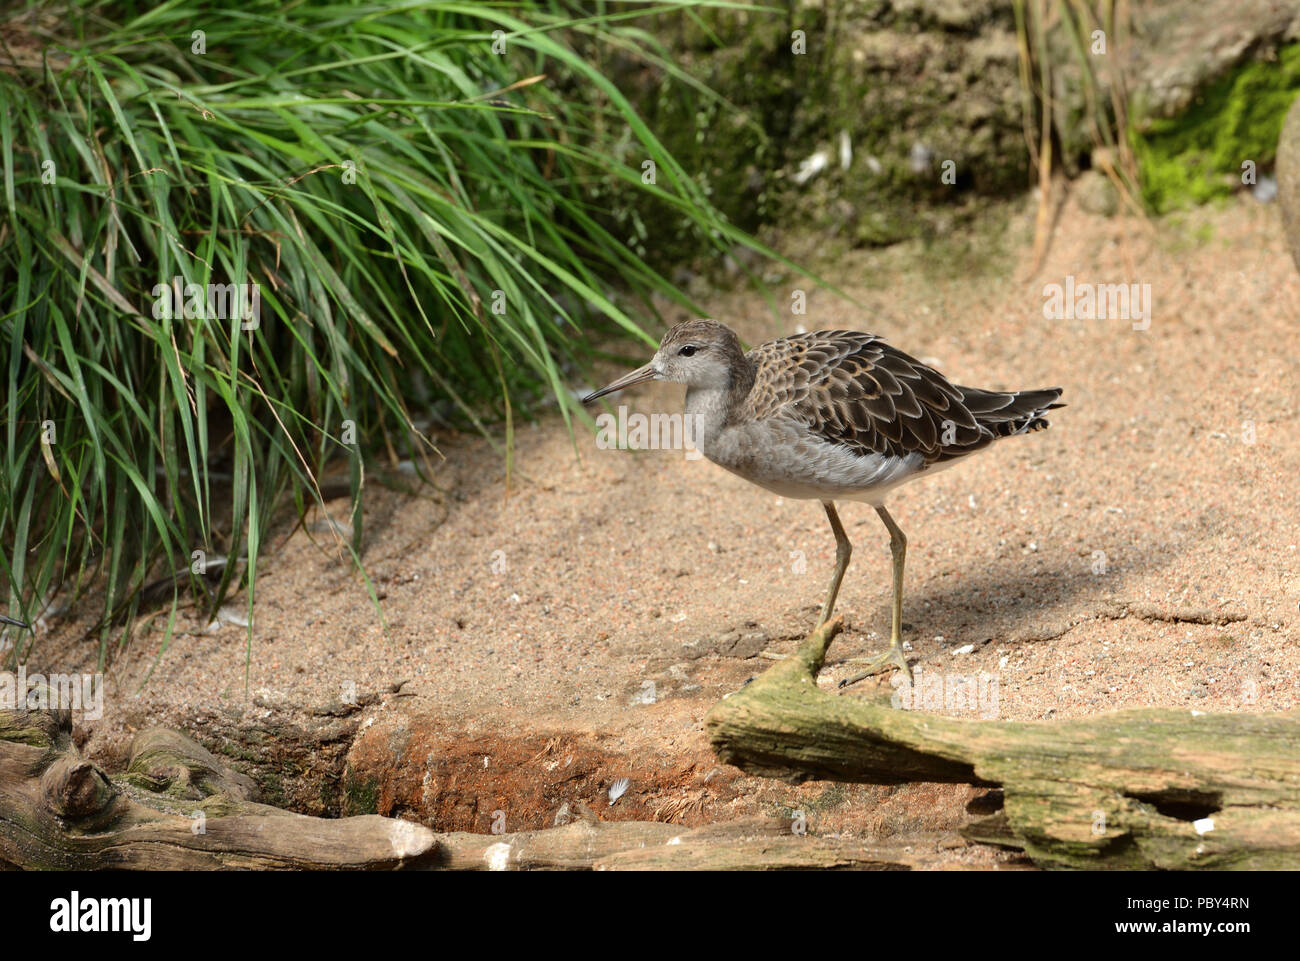 Ruff (Calidris pugnax), medium-sized wading bird that breeds in marshes and wet meadows Stock Photo